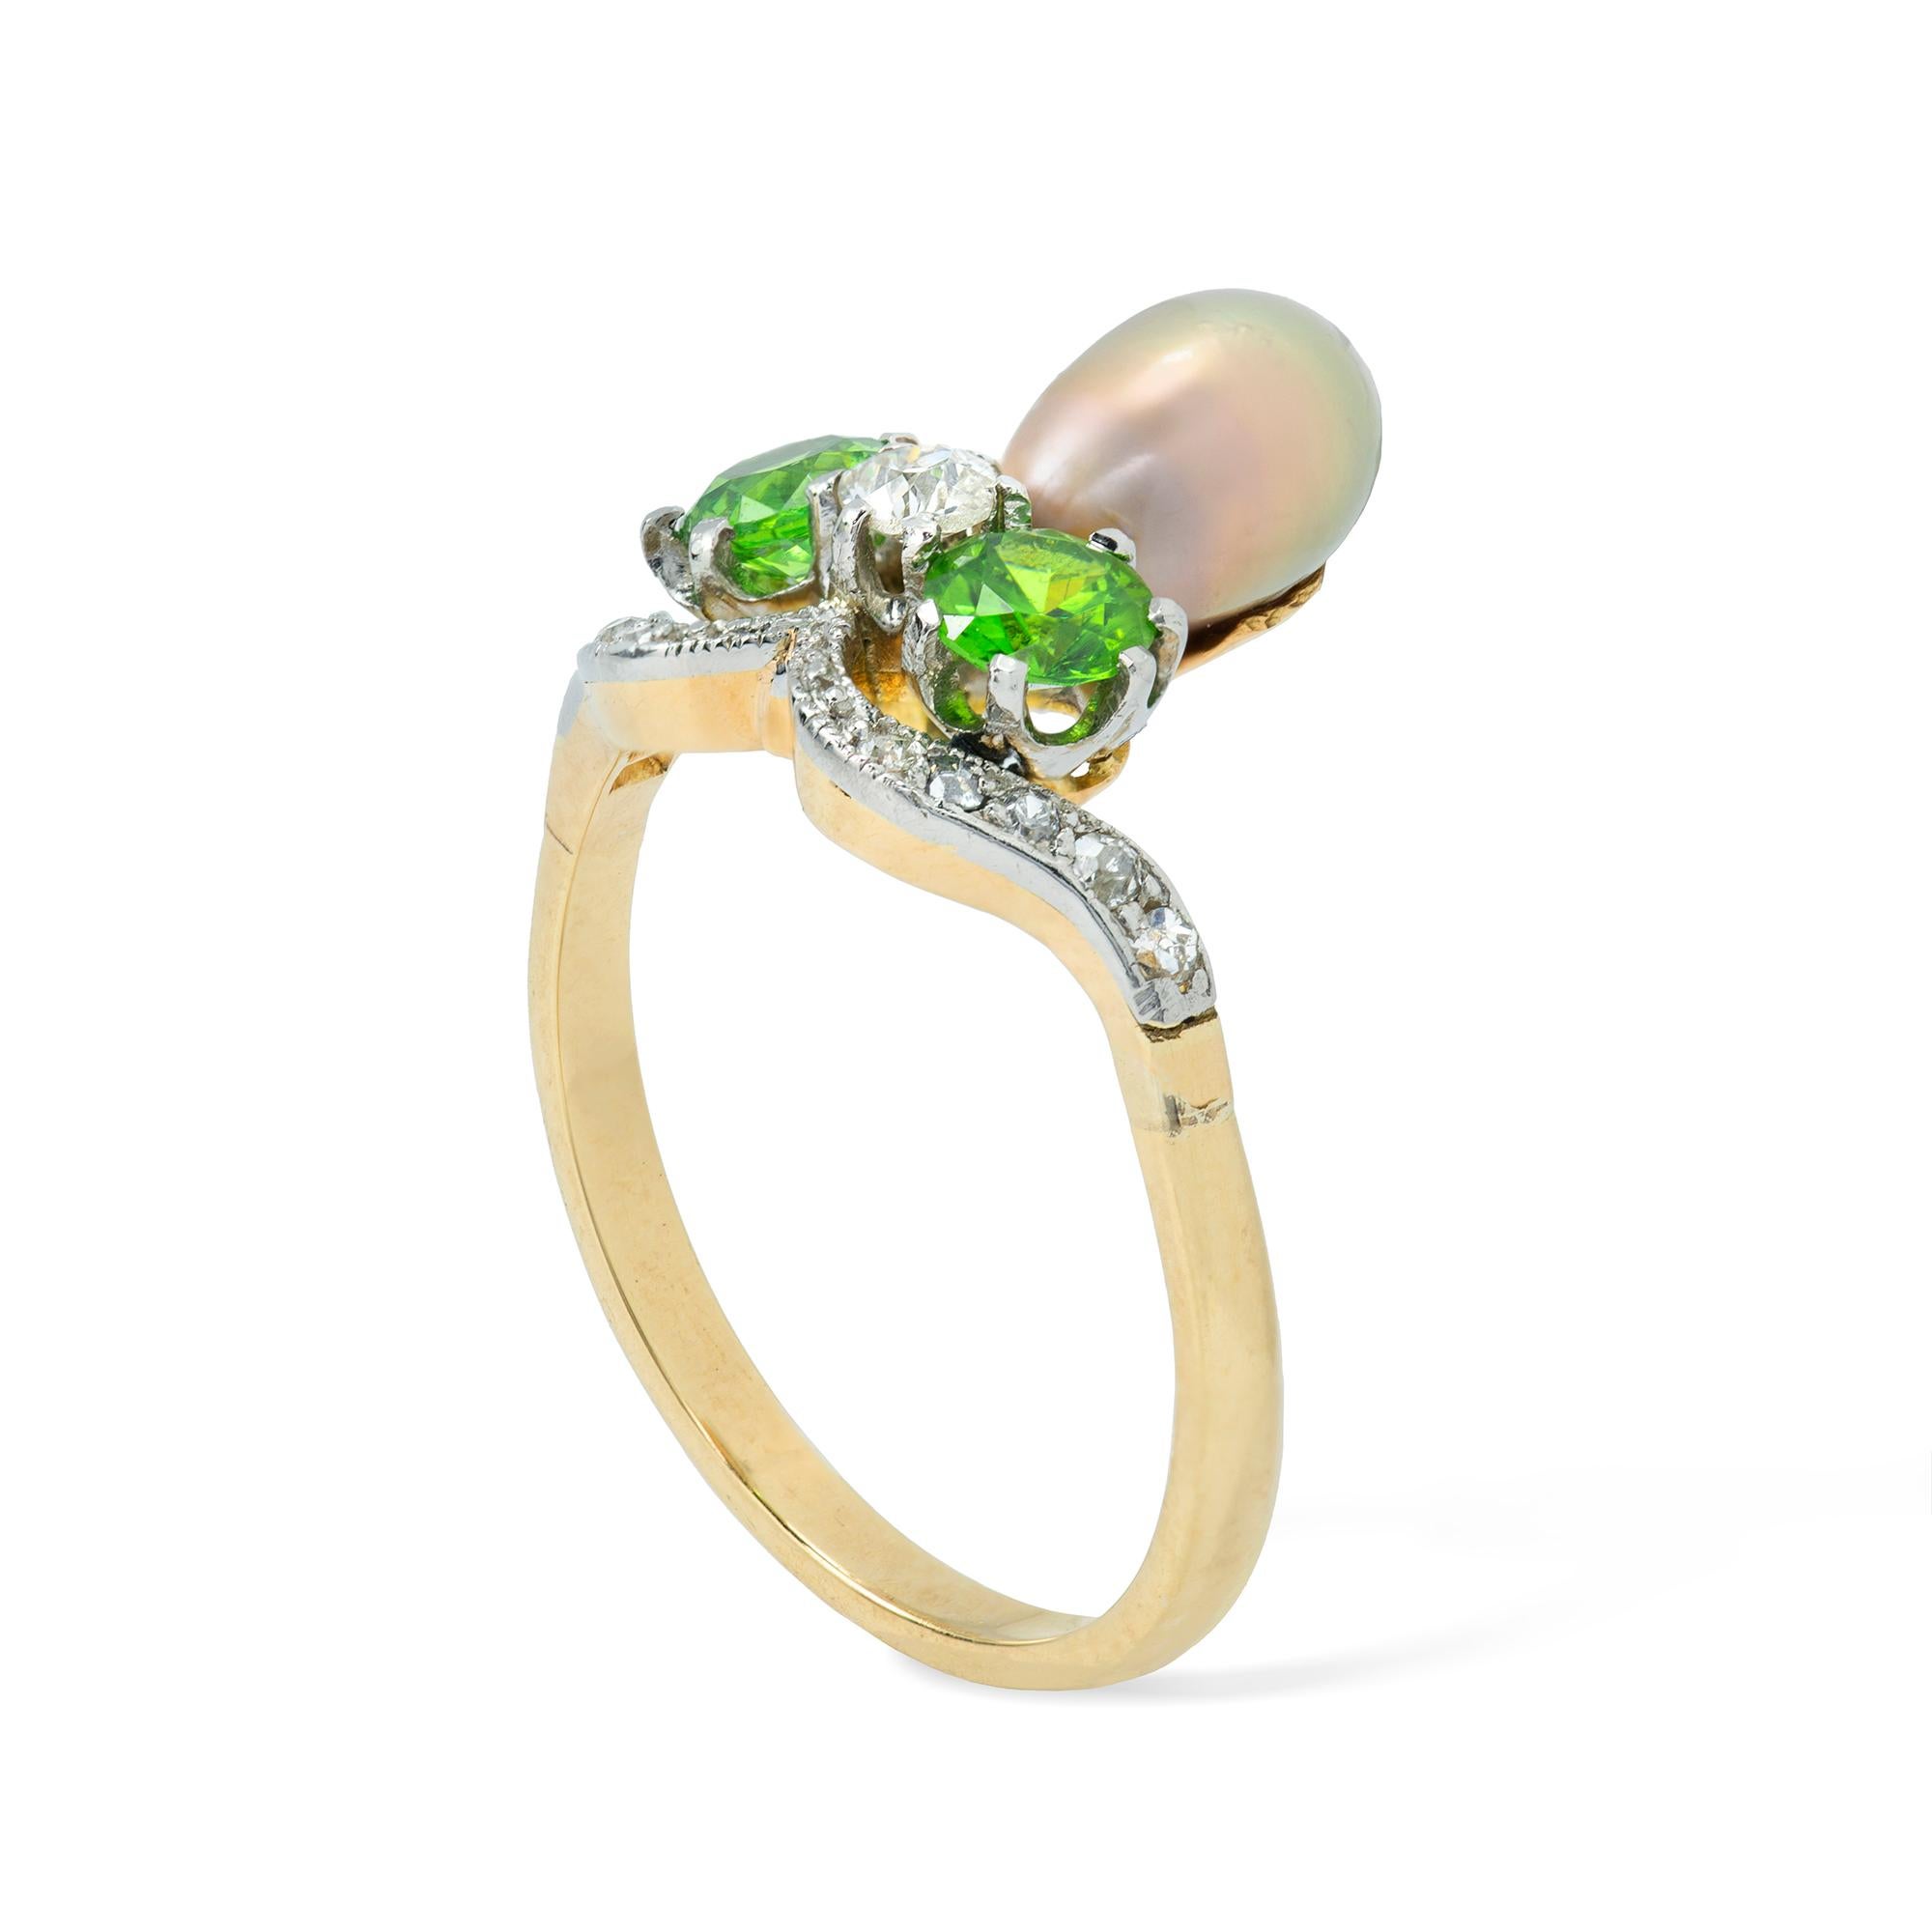 A Belle Epoque natural pearl, garnet and diamond aigrette ring, the greyish pink pearl accompanied by GCS report stating to be natural saltwater, set within two round faceted demantoid garnets and one old-cut diamond, the platinum and yellow gold